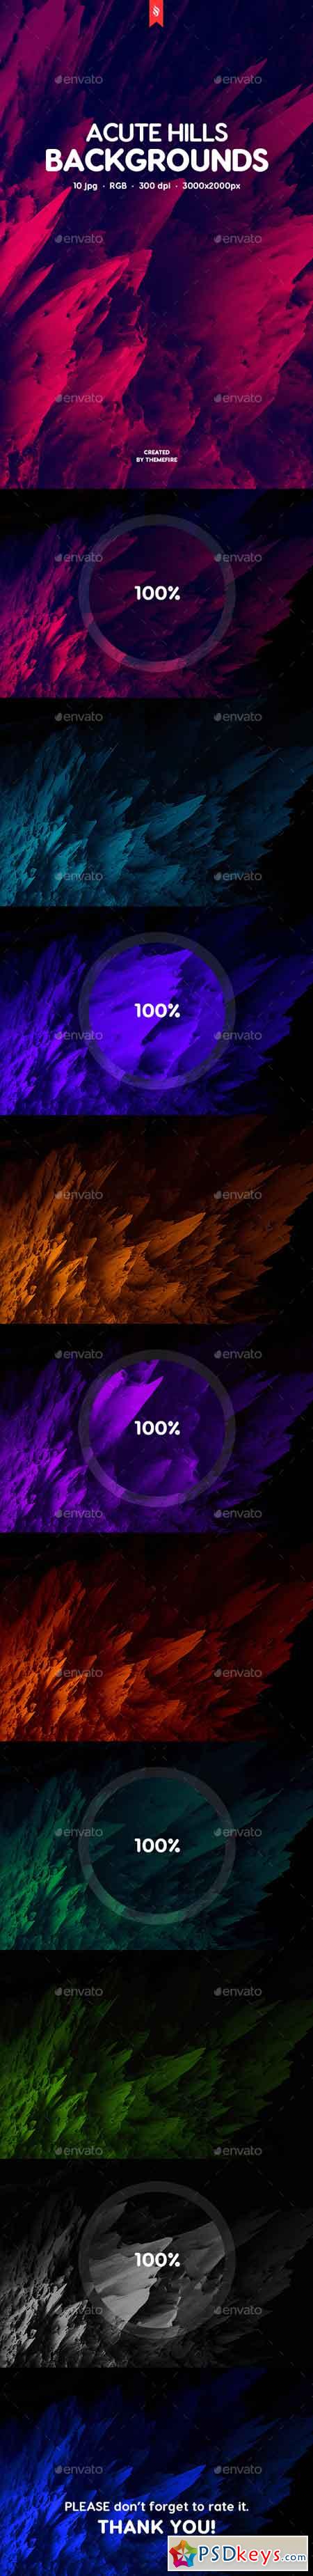 Abstract Acute Hills Backgrounds 19719774